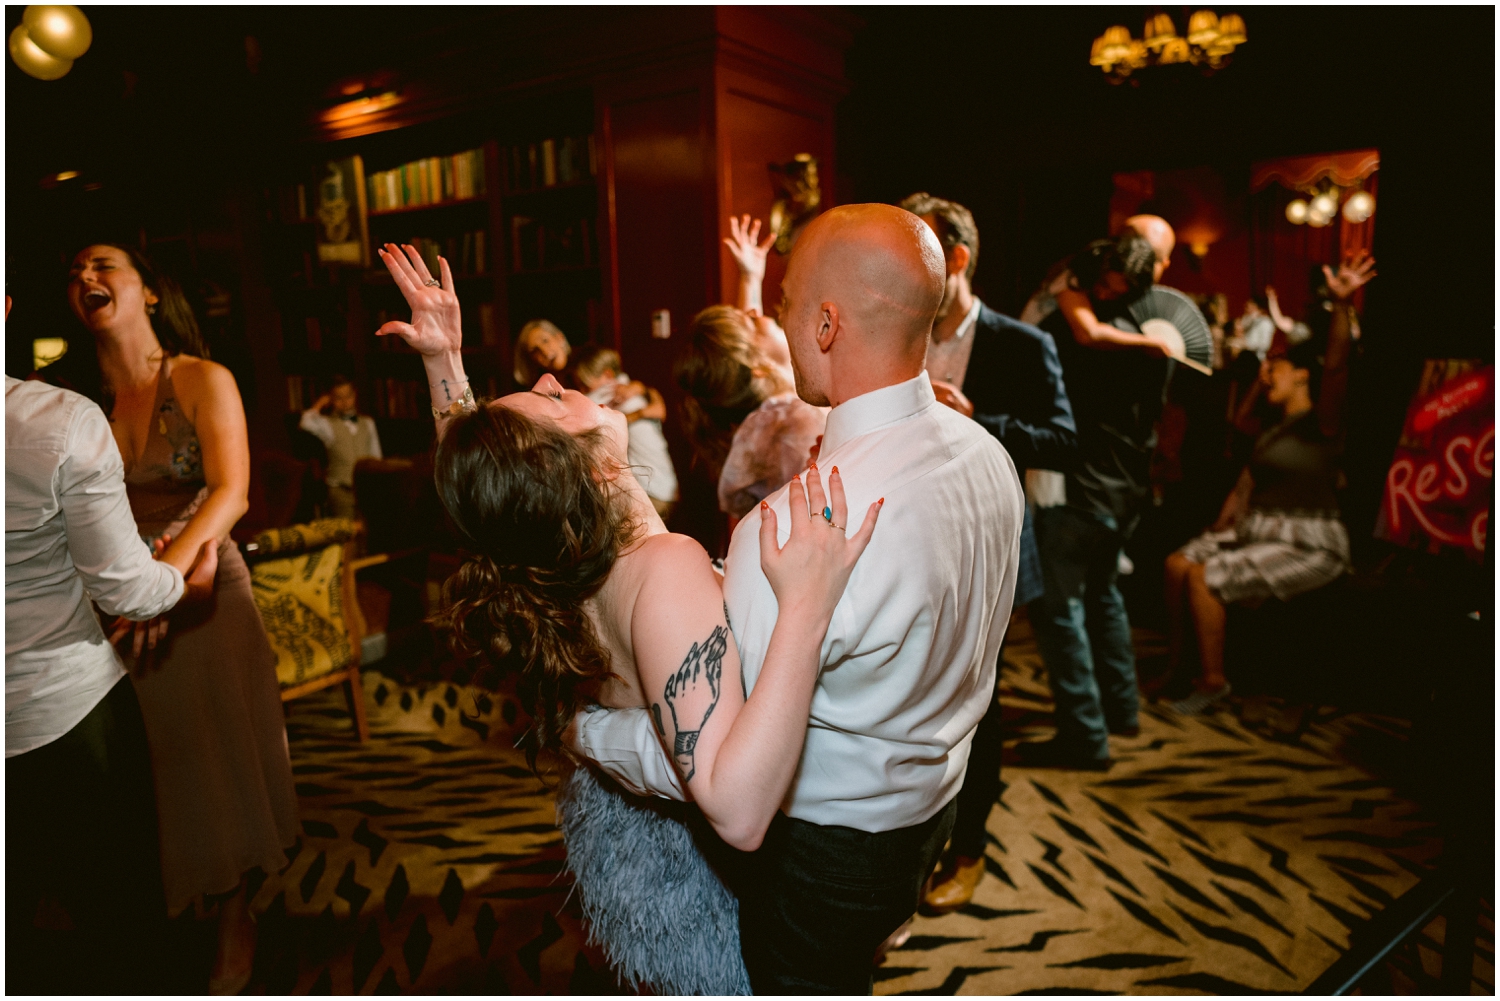 The bride and groom throw their hands up while they dance.